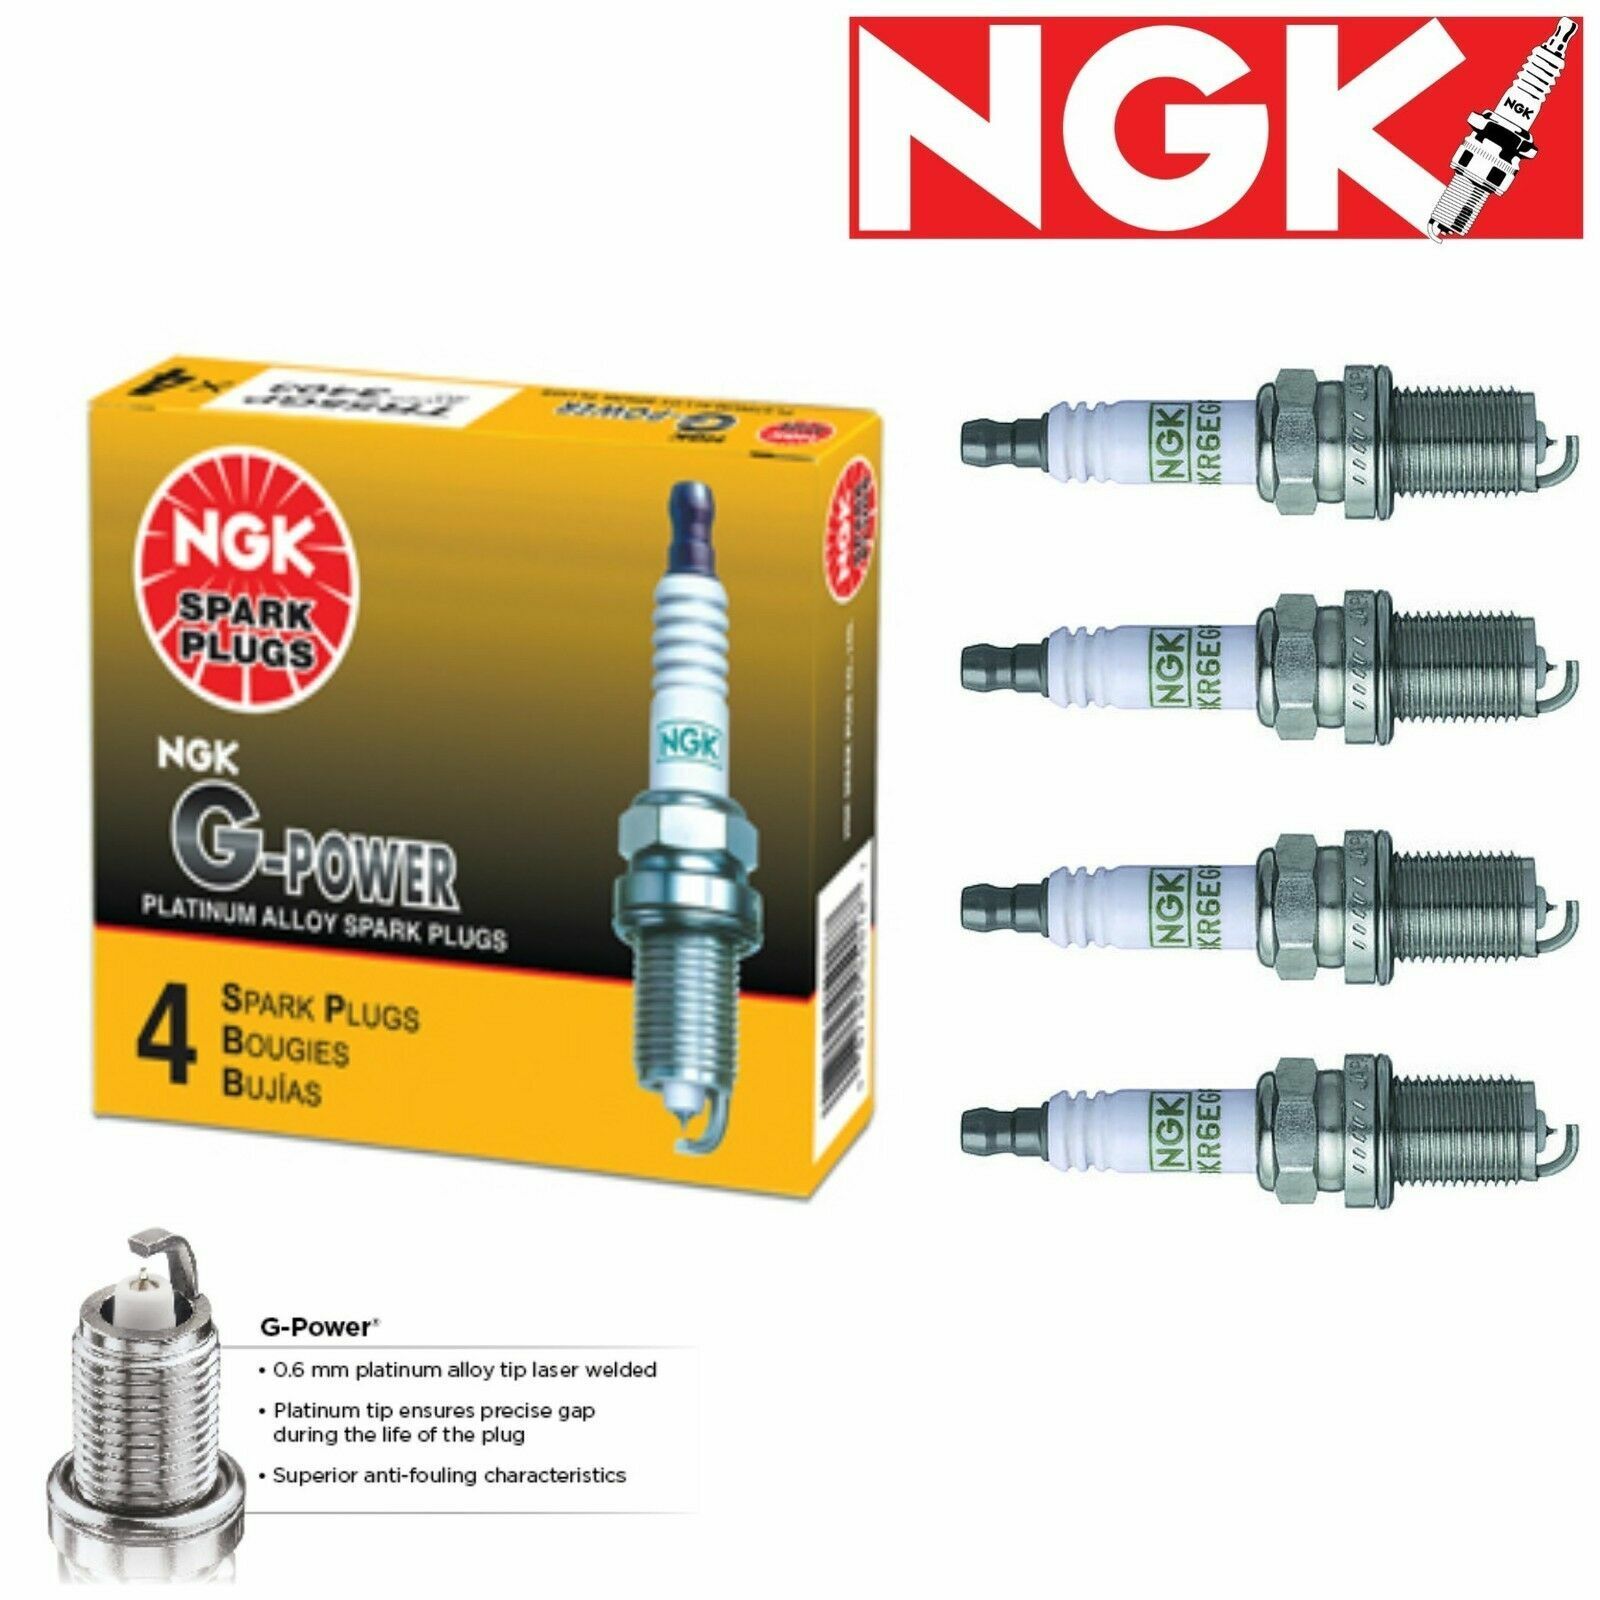 4 x Spark Plugs NGK G-Power for 1992-2011 Toyota Camry 2.2L 2AZFXE 2AZFE 2.4L